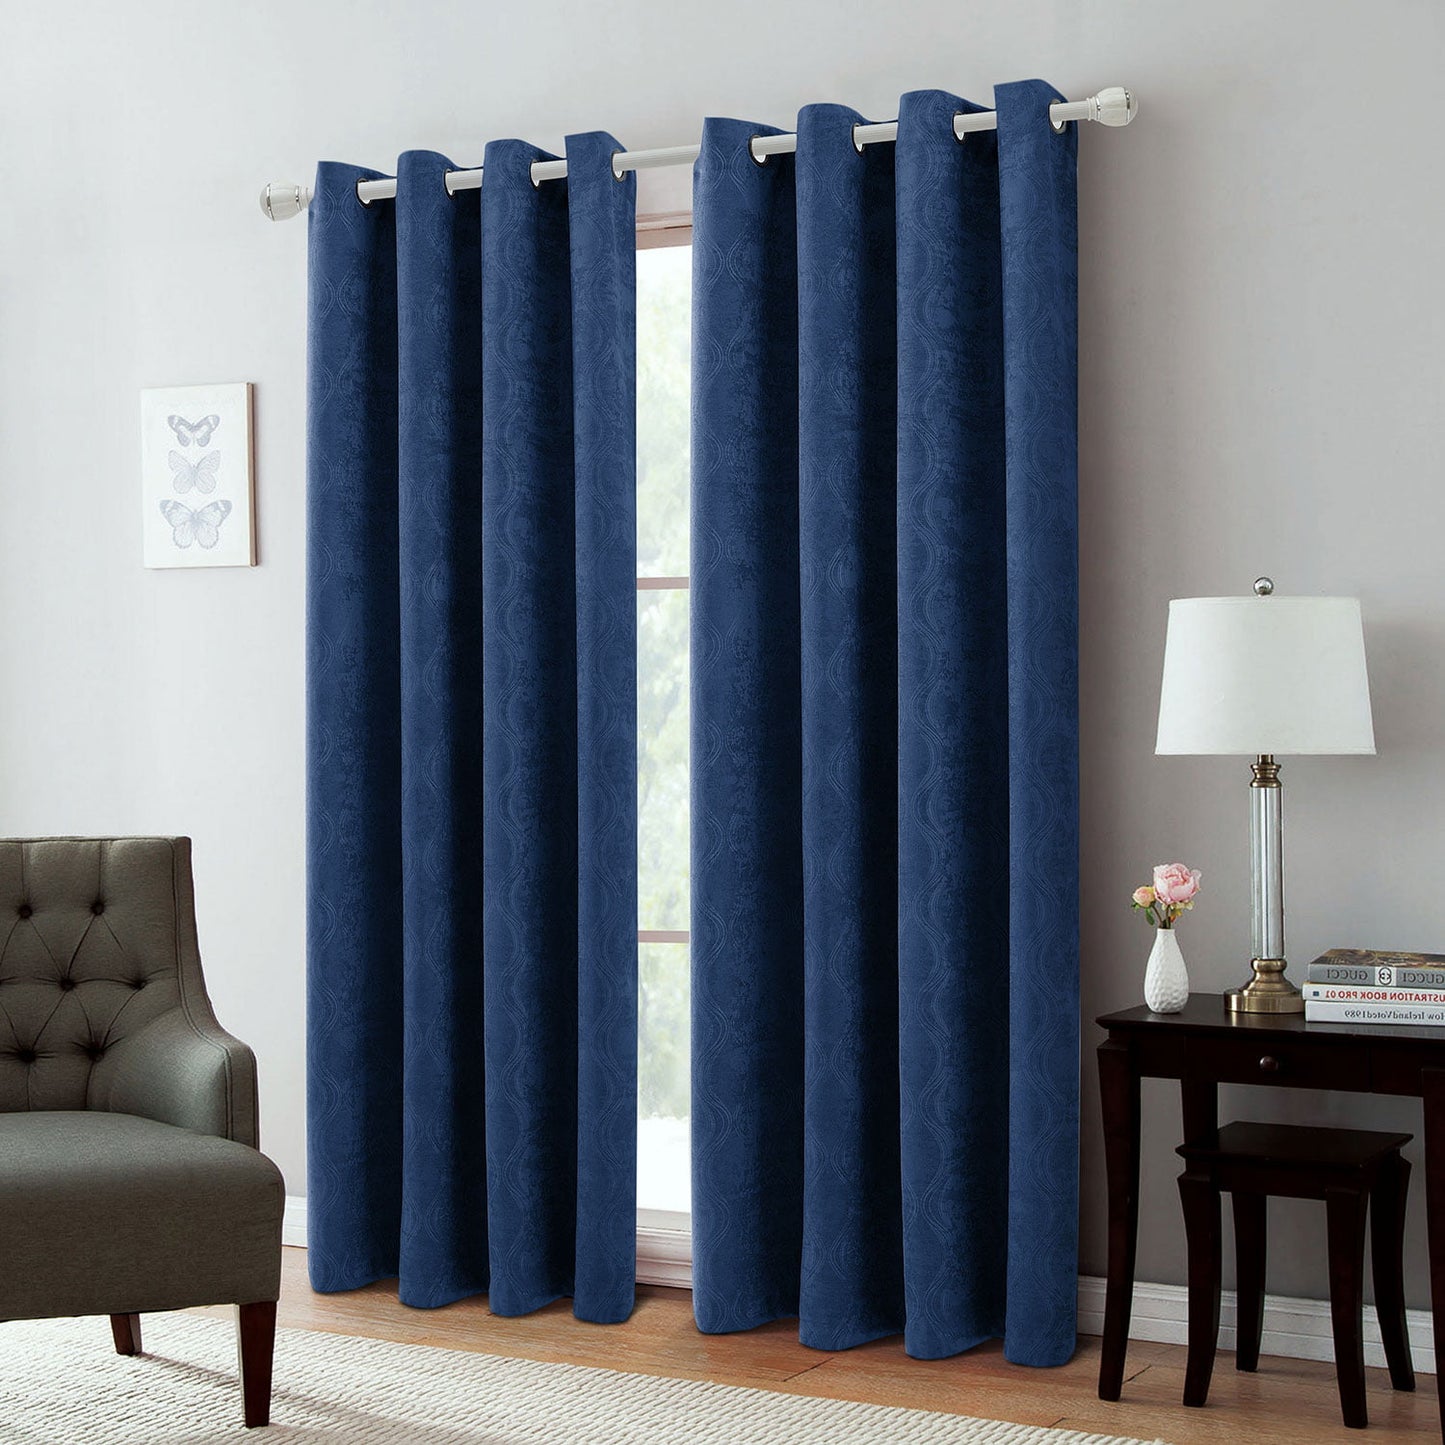 Andy Ogee Room Darkening Curtain Grommet Window Panel Navy 54x84 Inches